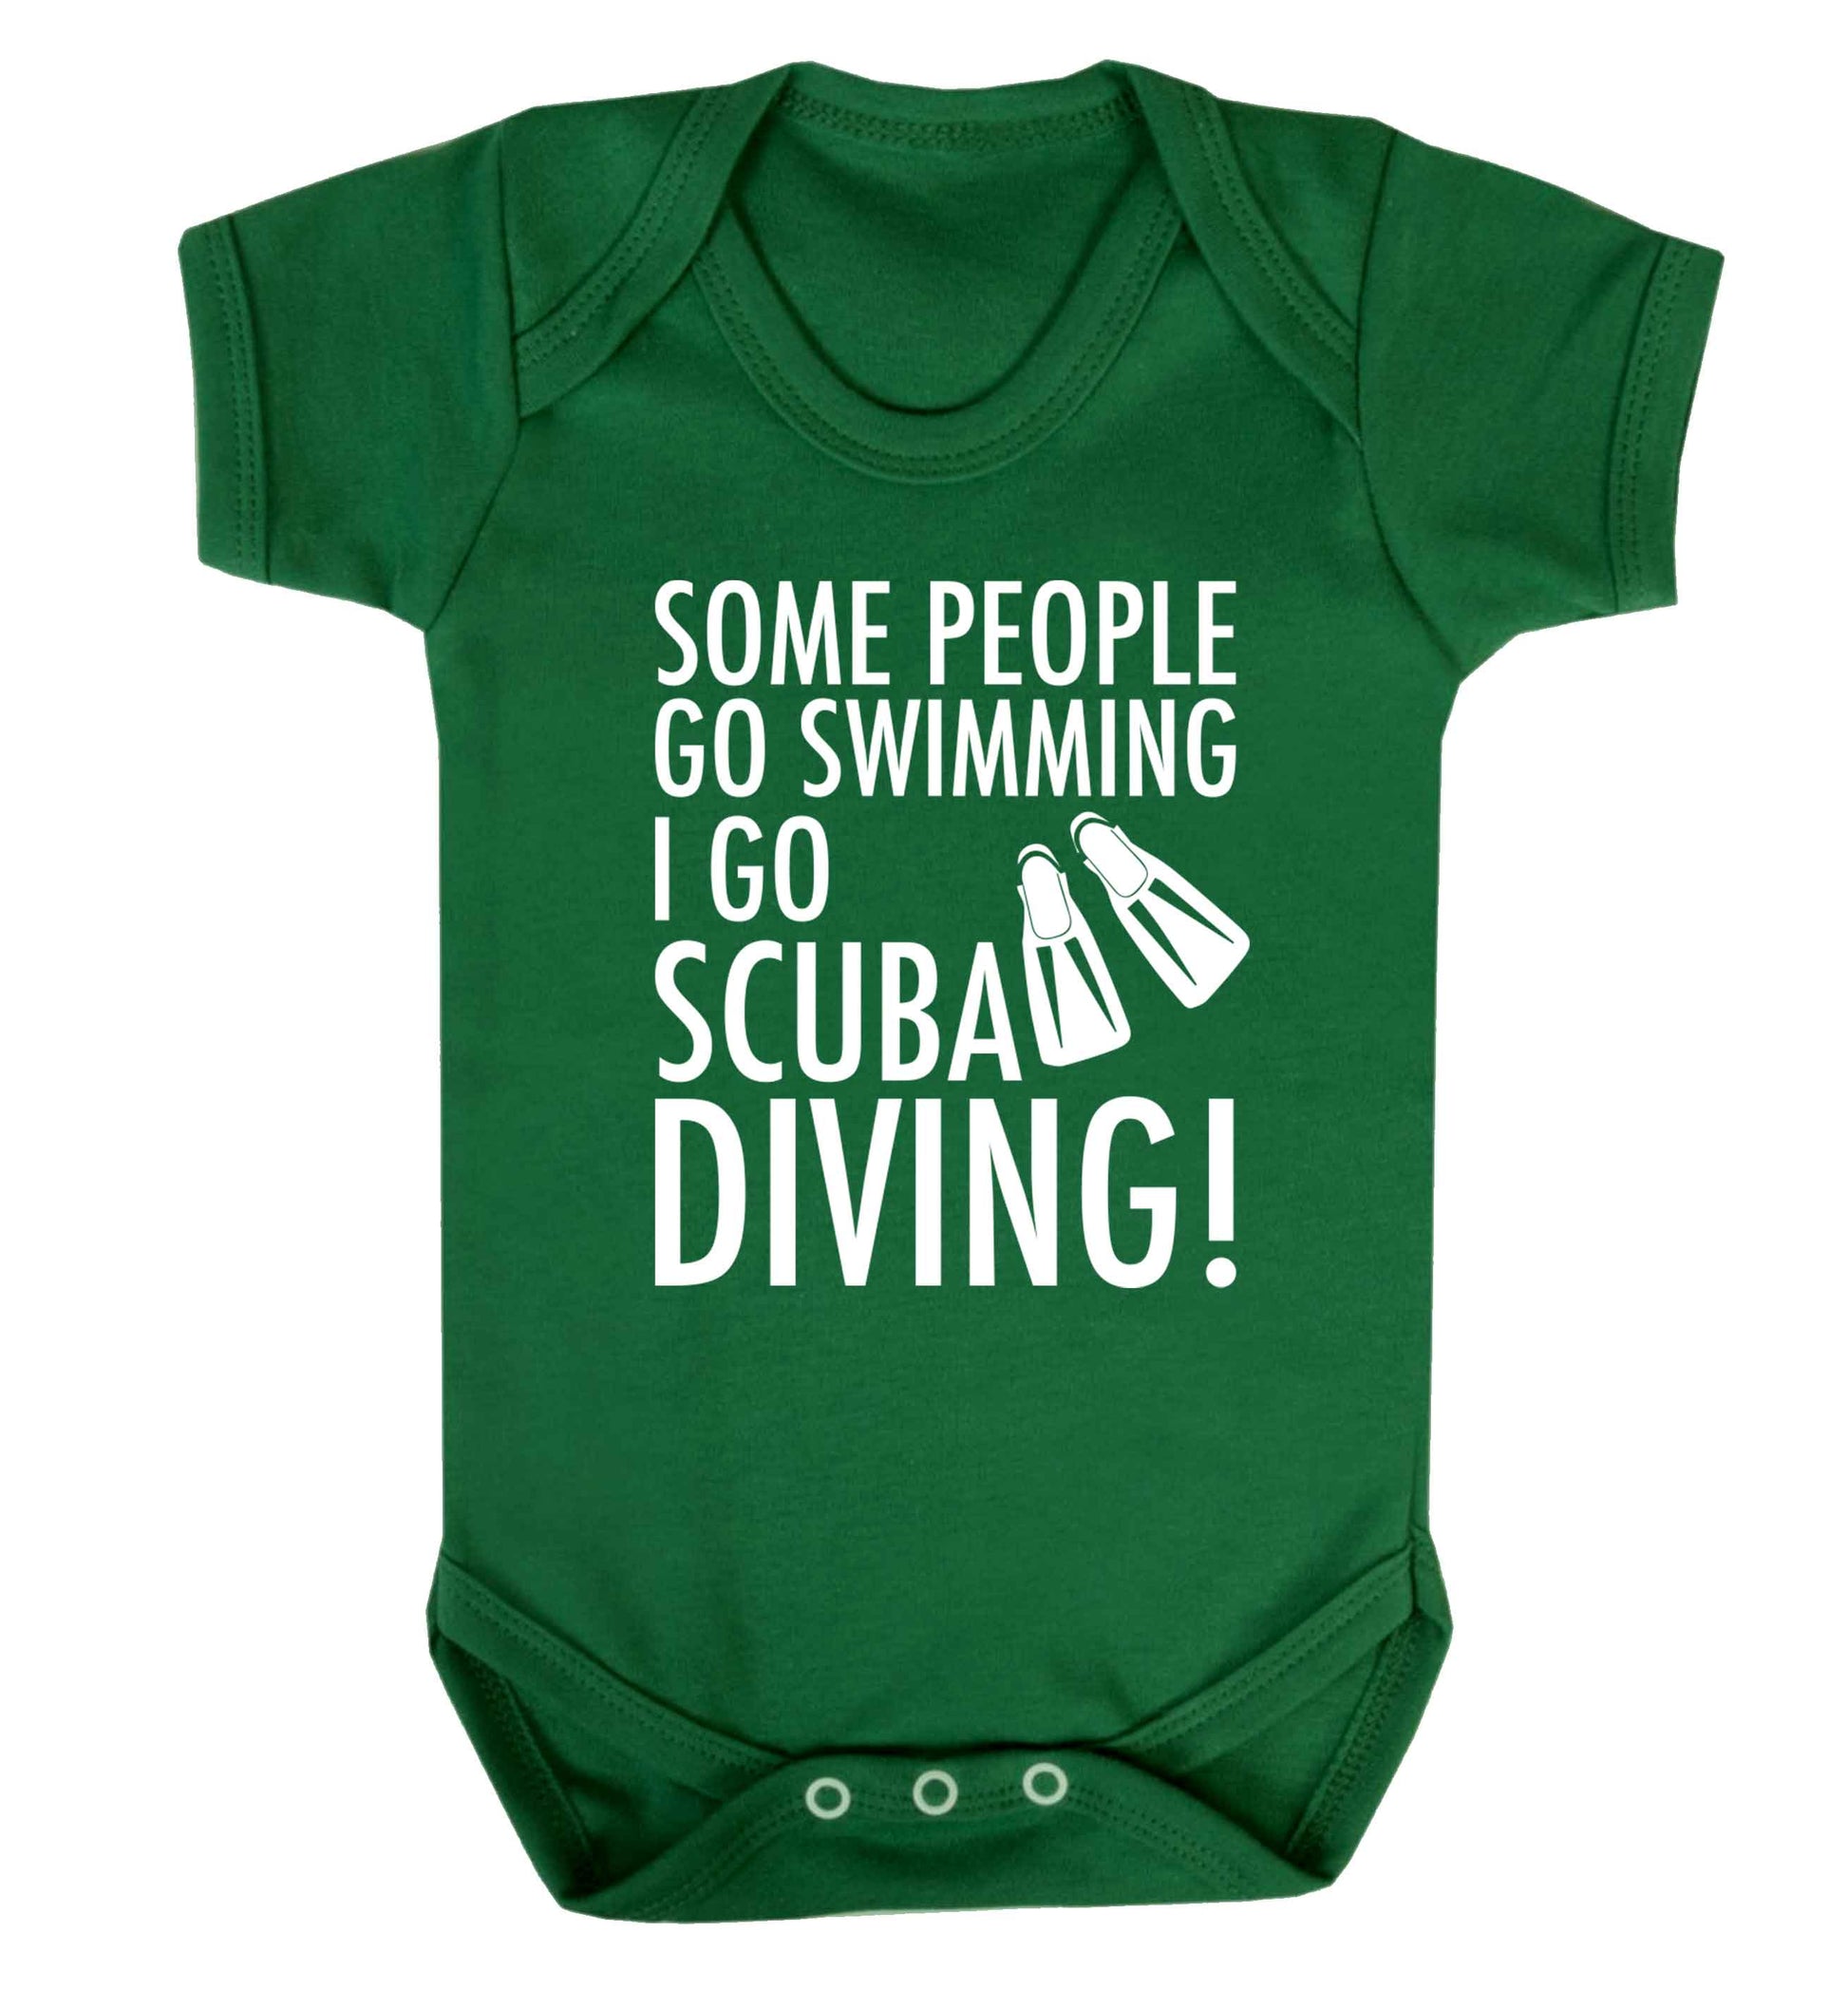 Some people go swimming I go scuba diving! Baby Vest green 18-24 months